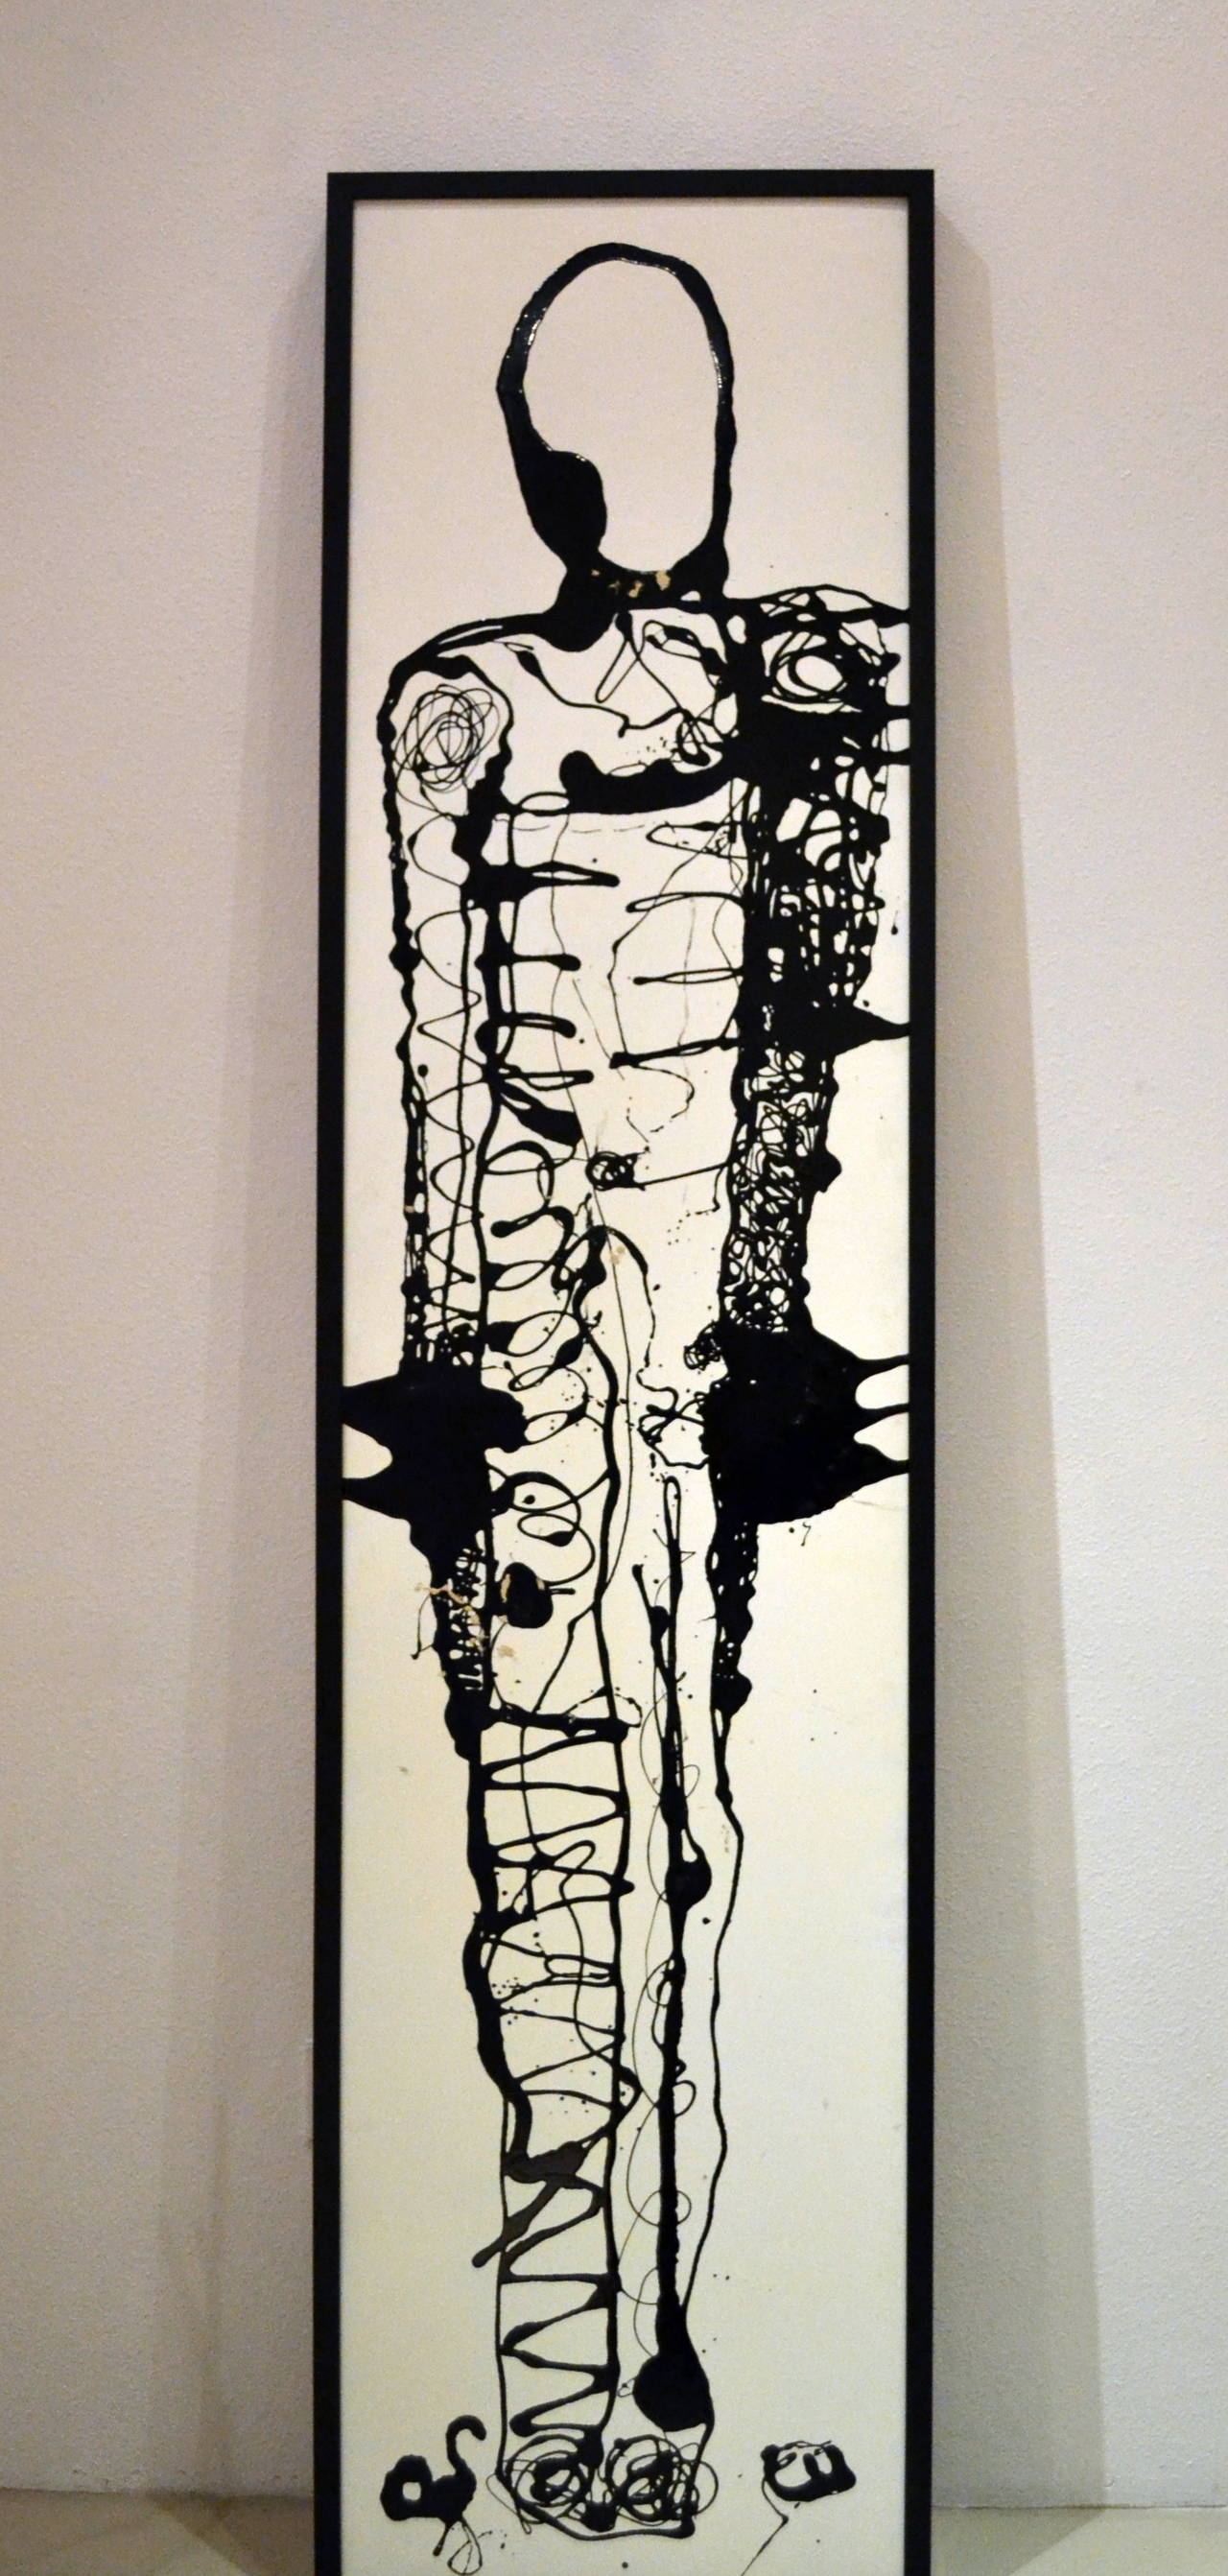 Standing 8 feet tall, this painting of a figure has been painted on plywood and then framed in a simple black molding. The artist Christopher aka Christopher Shoemaker (b. 1968) is self-taught. He used a technique of dripping acrylic paint onto the